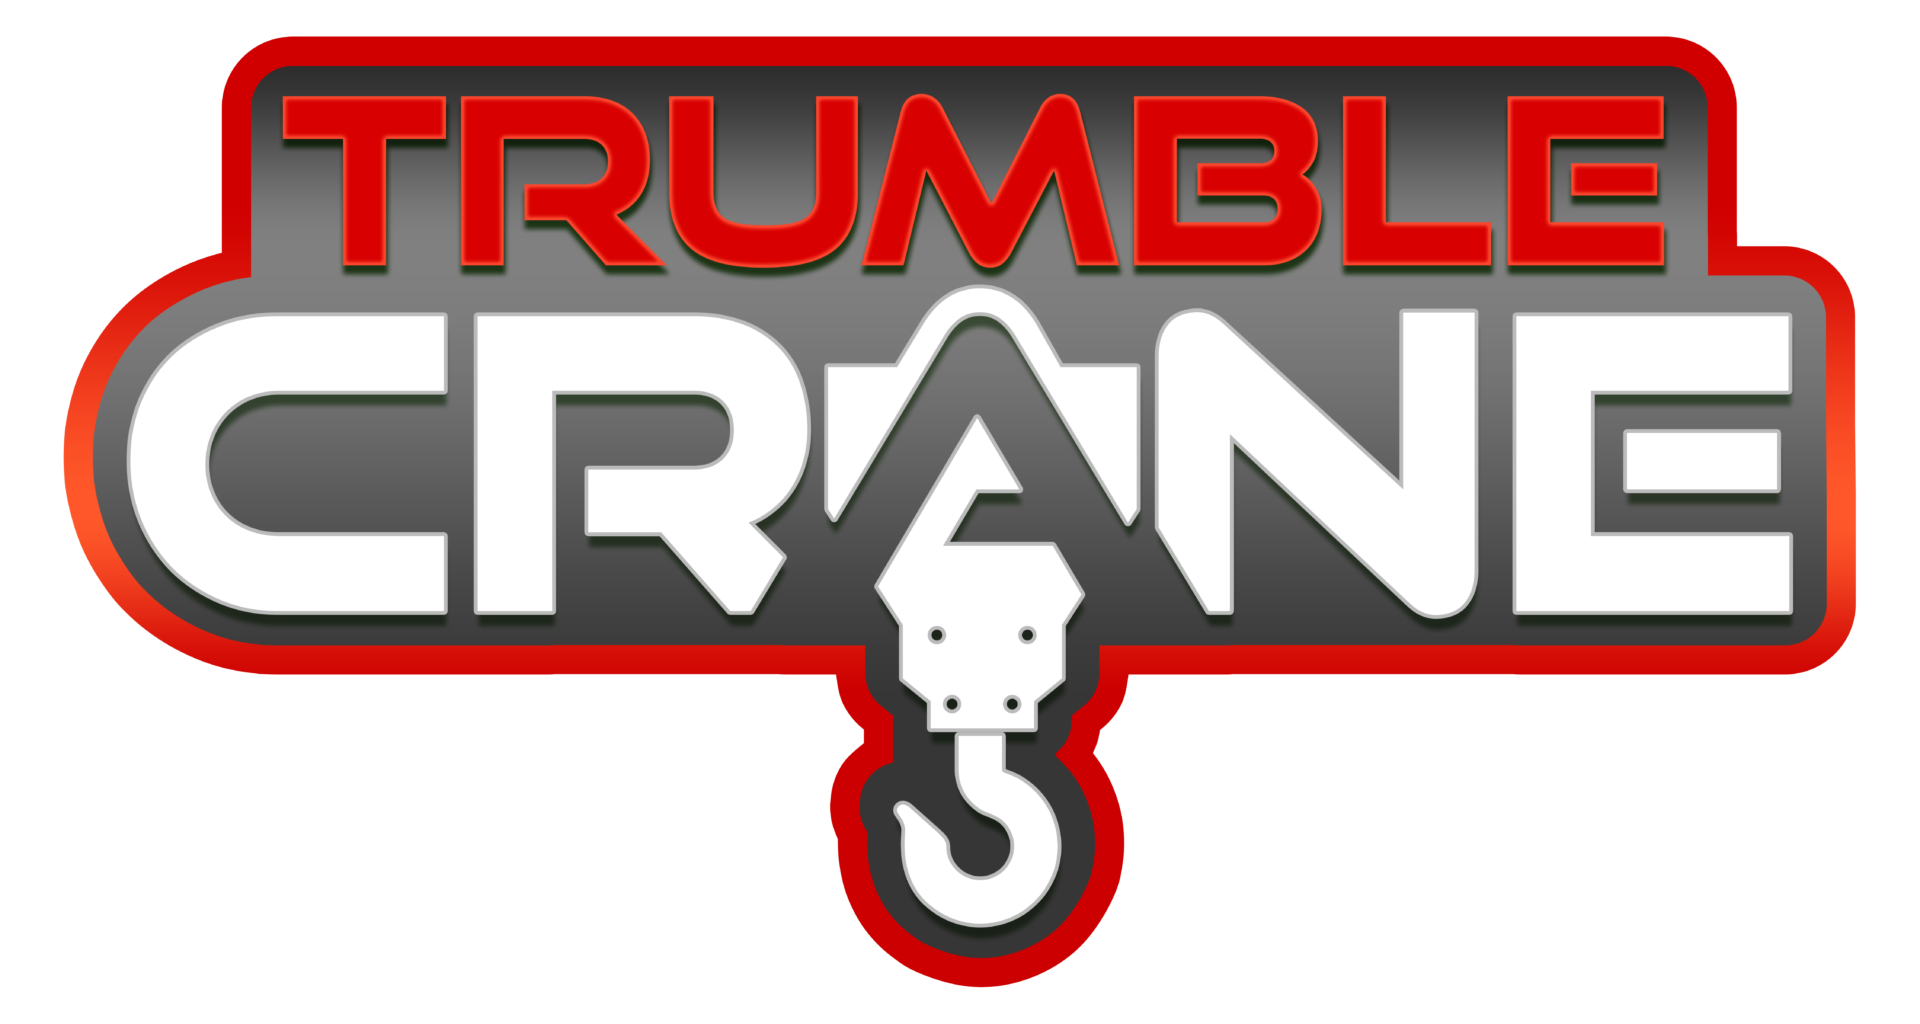 A red and white logo for rumble ran.